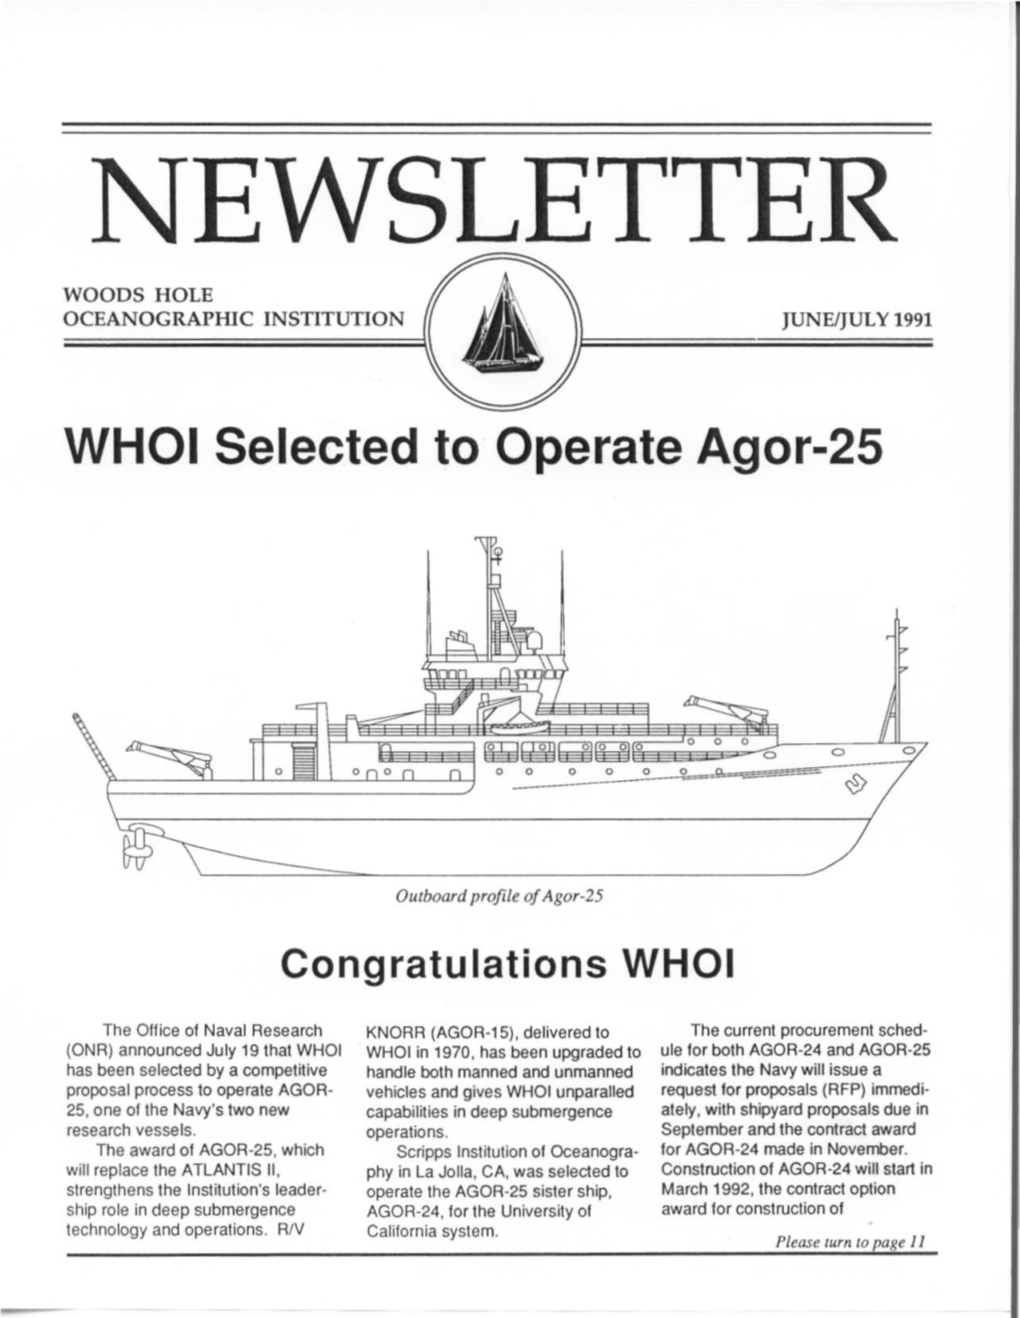 WHOI Selected to Operate Agor-25